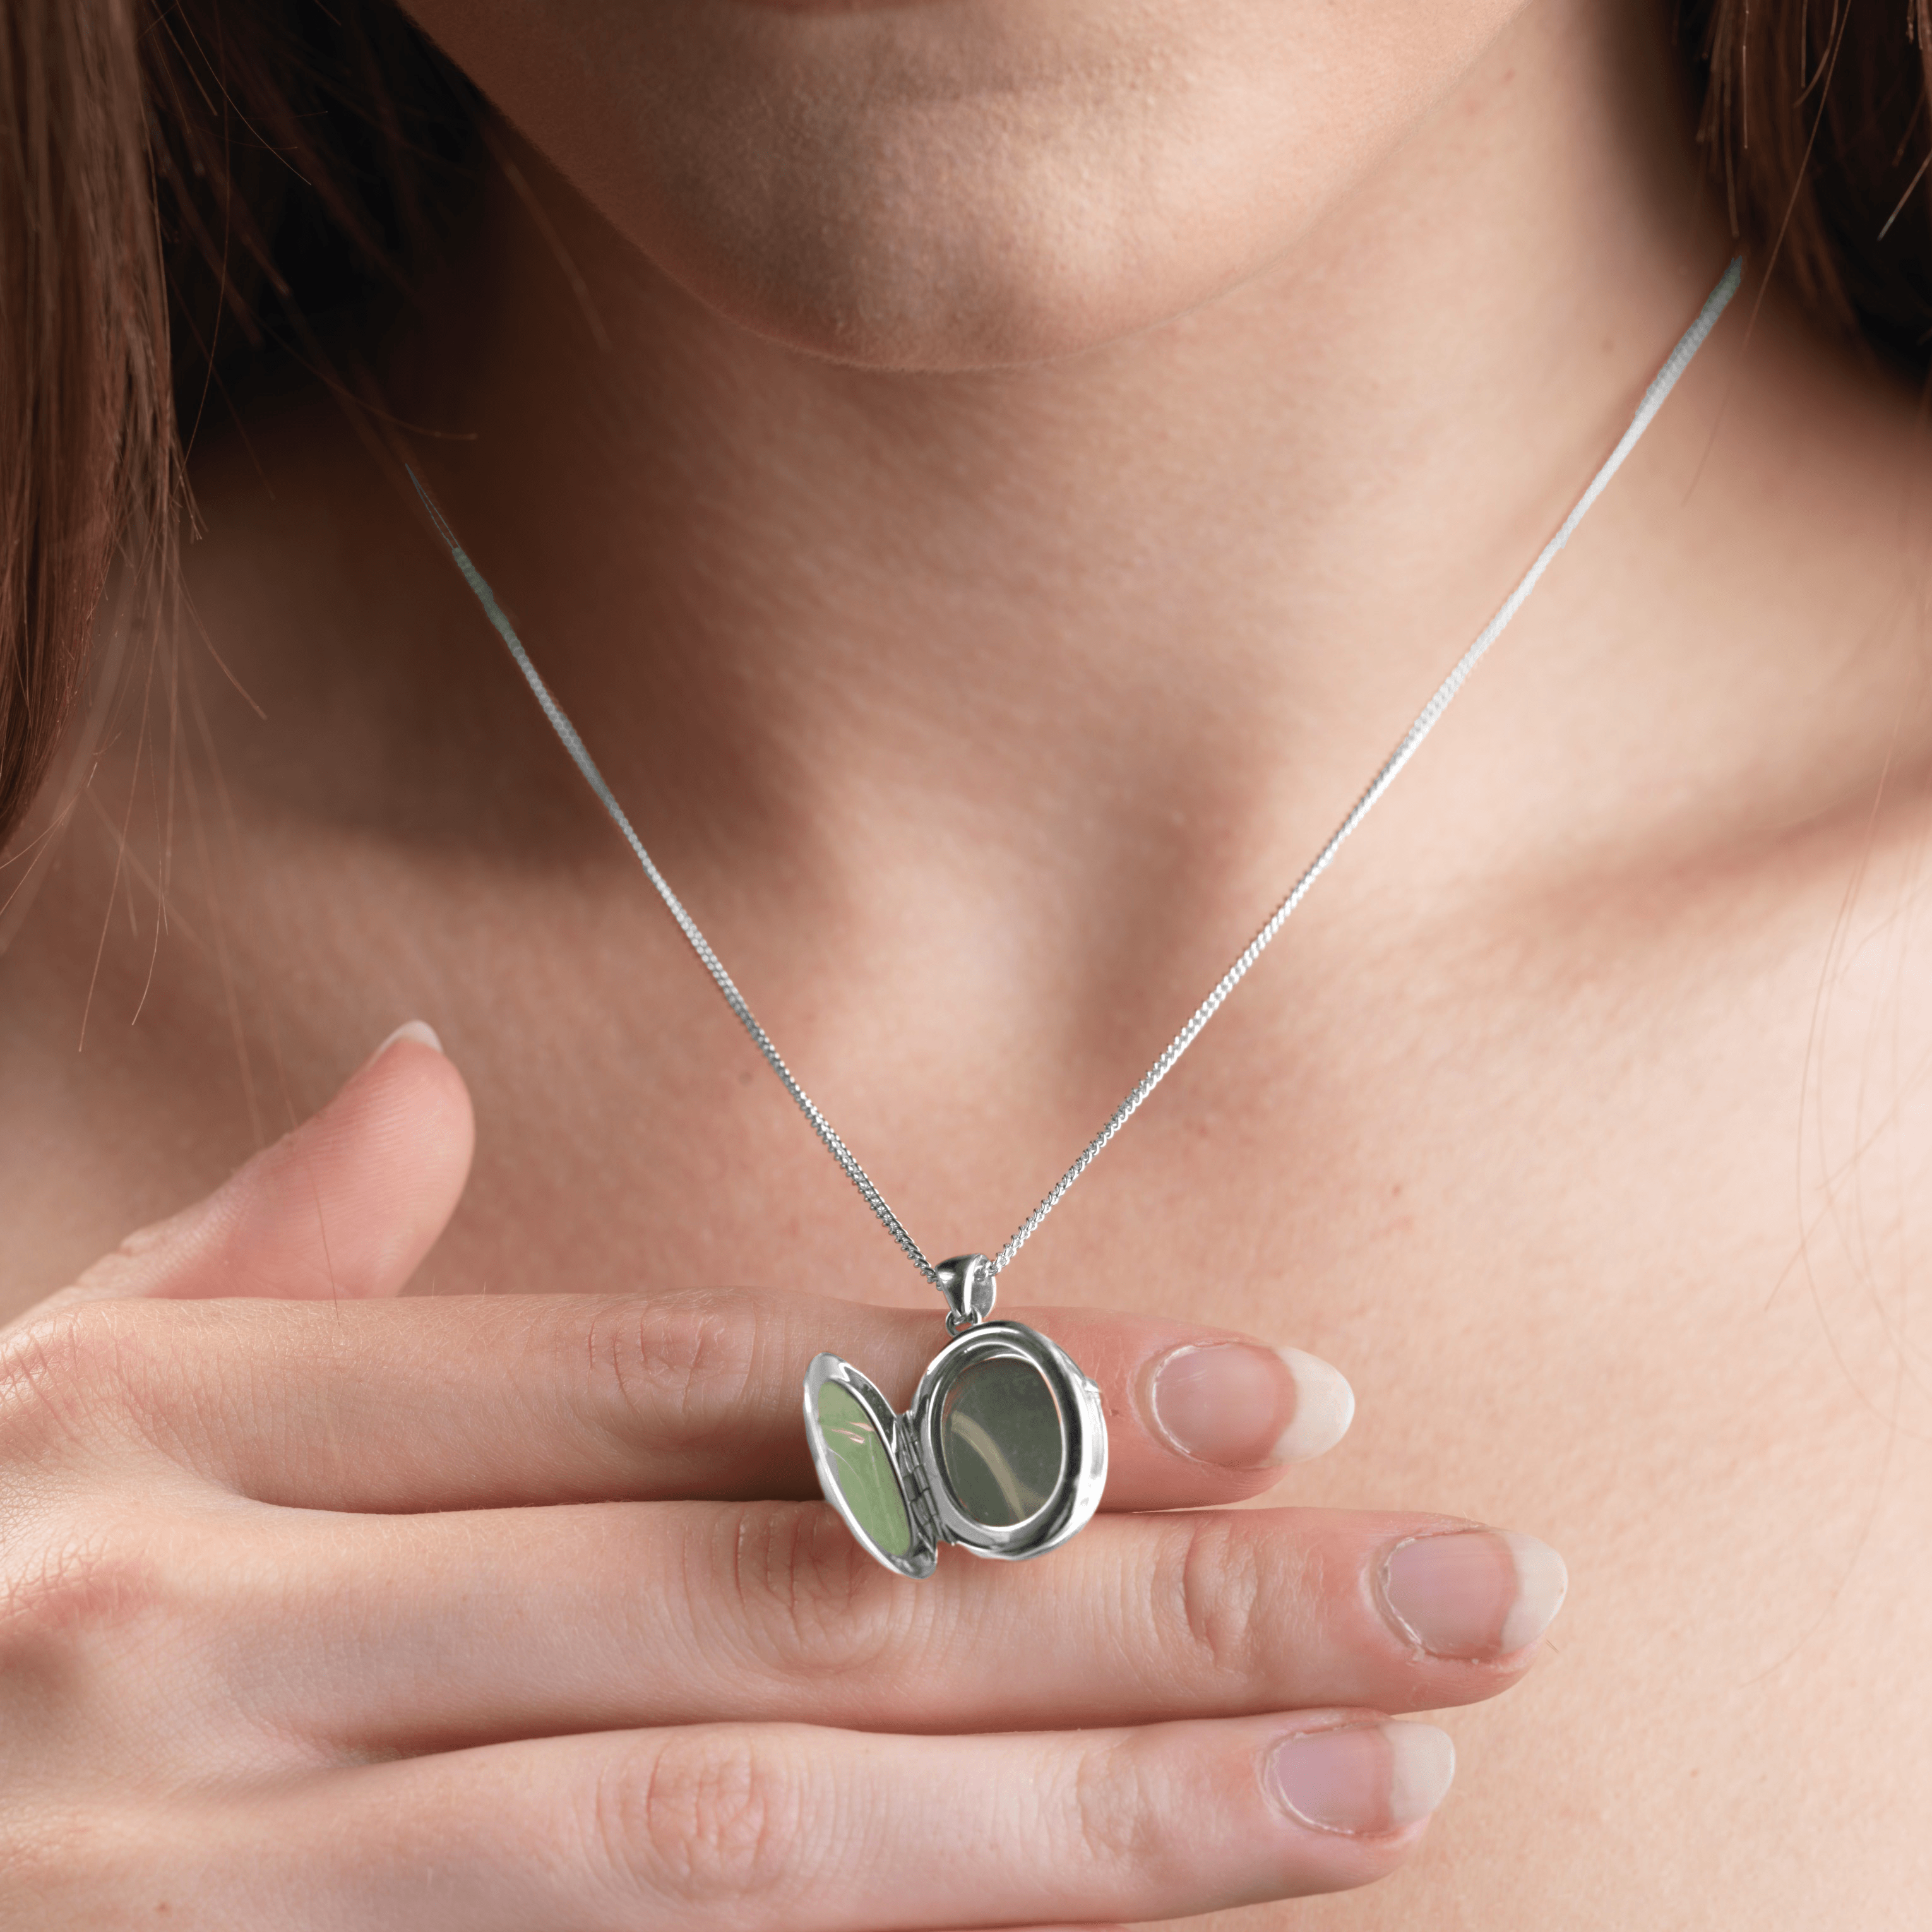 Model holding open a 9 ct white gold 4-photo oval locket on a 9 ct white gold curb chain